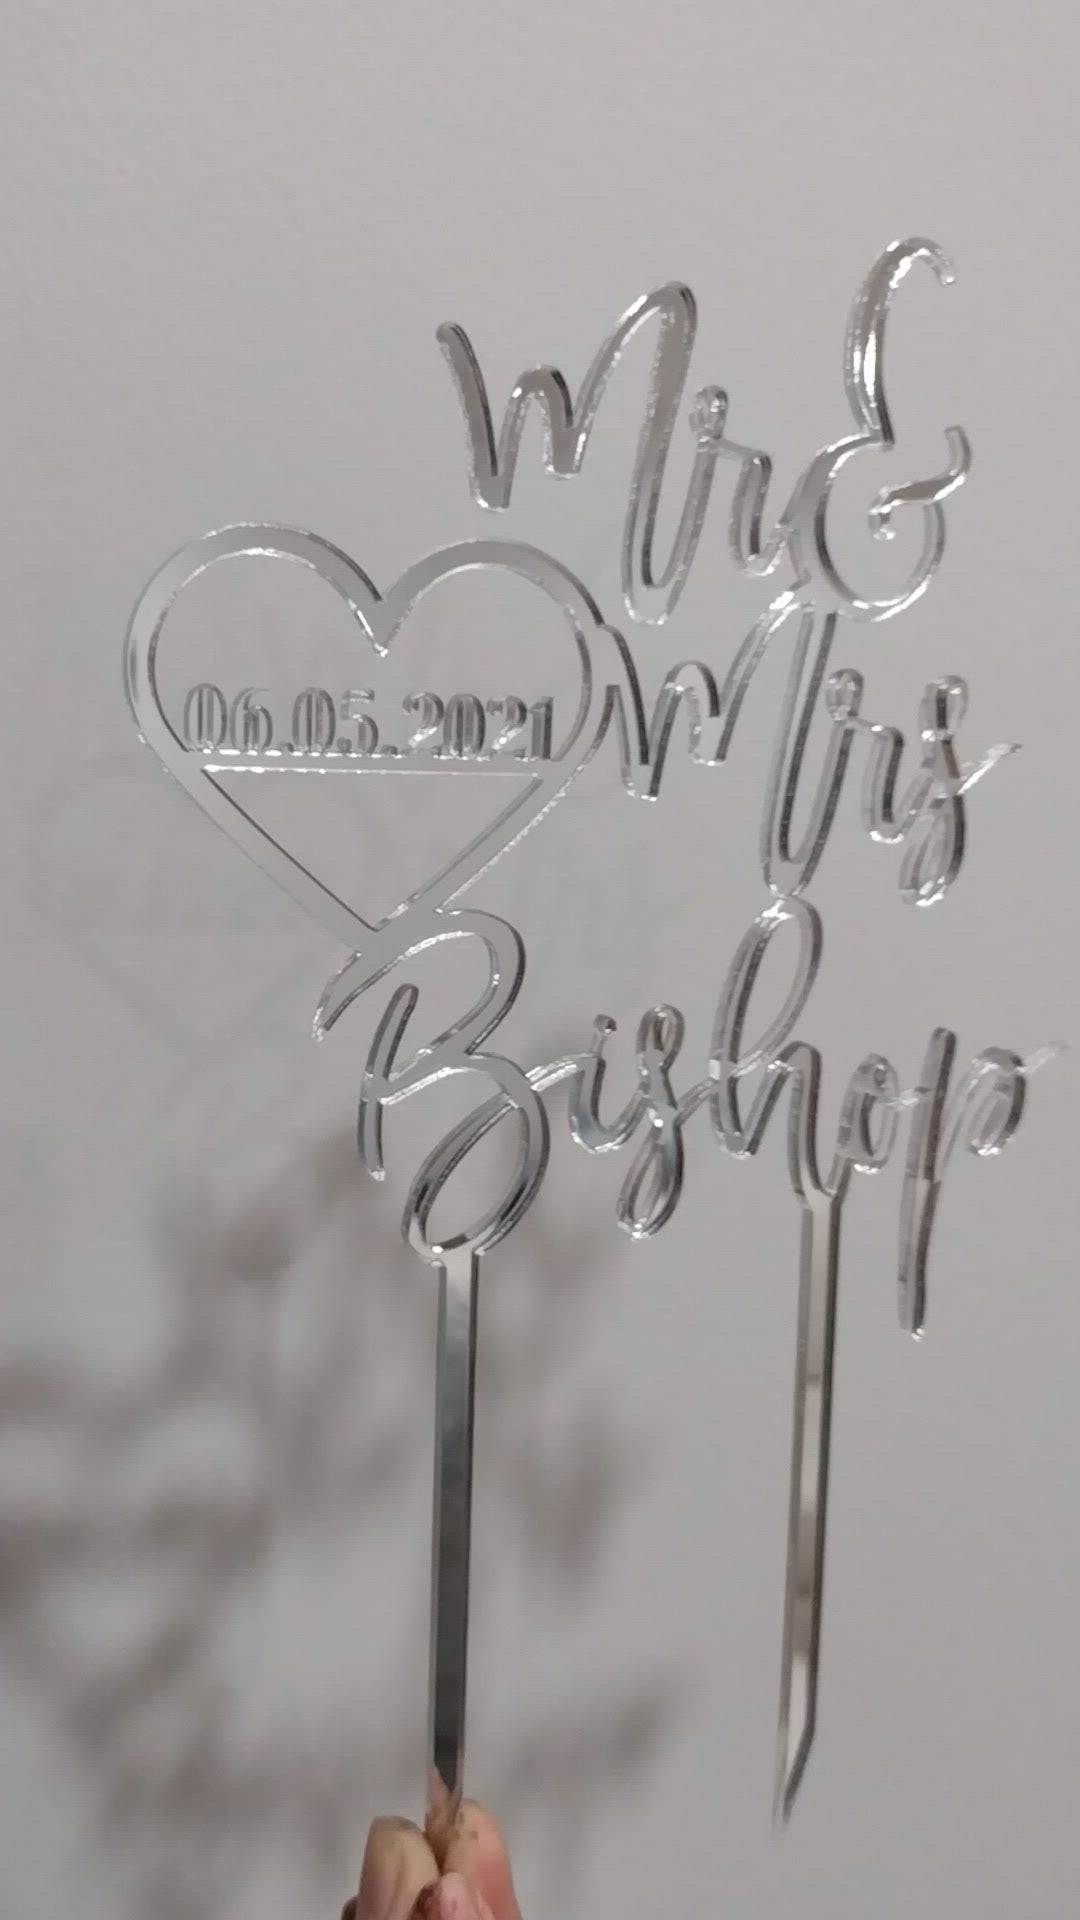 Mr & Mrs Surname with Heart Cake Topper